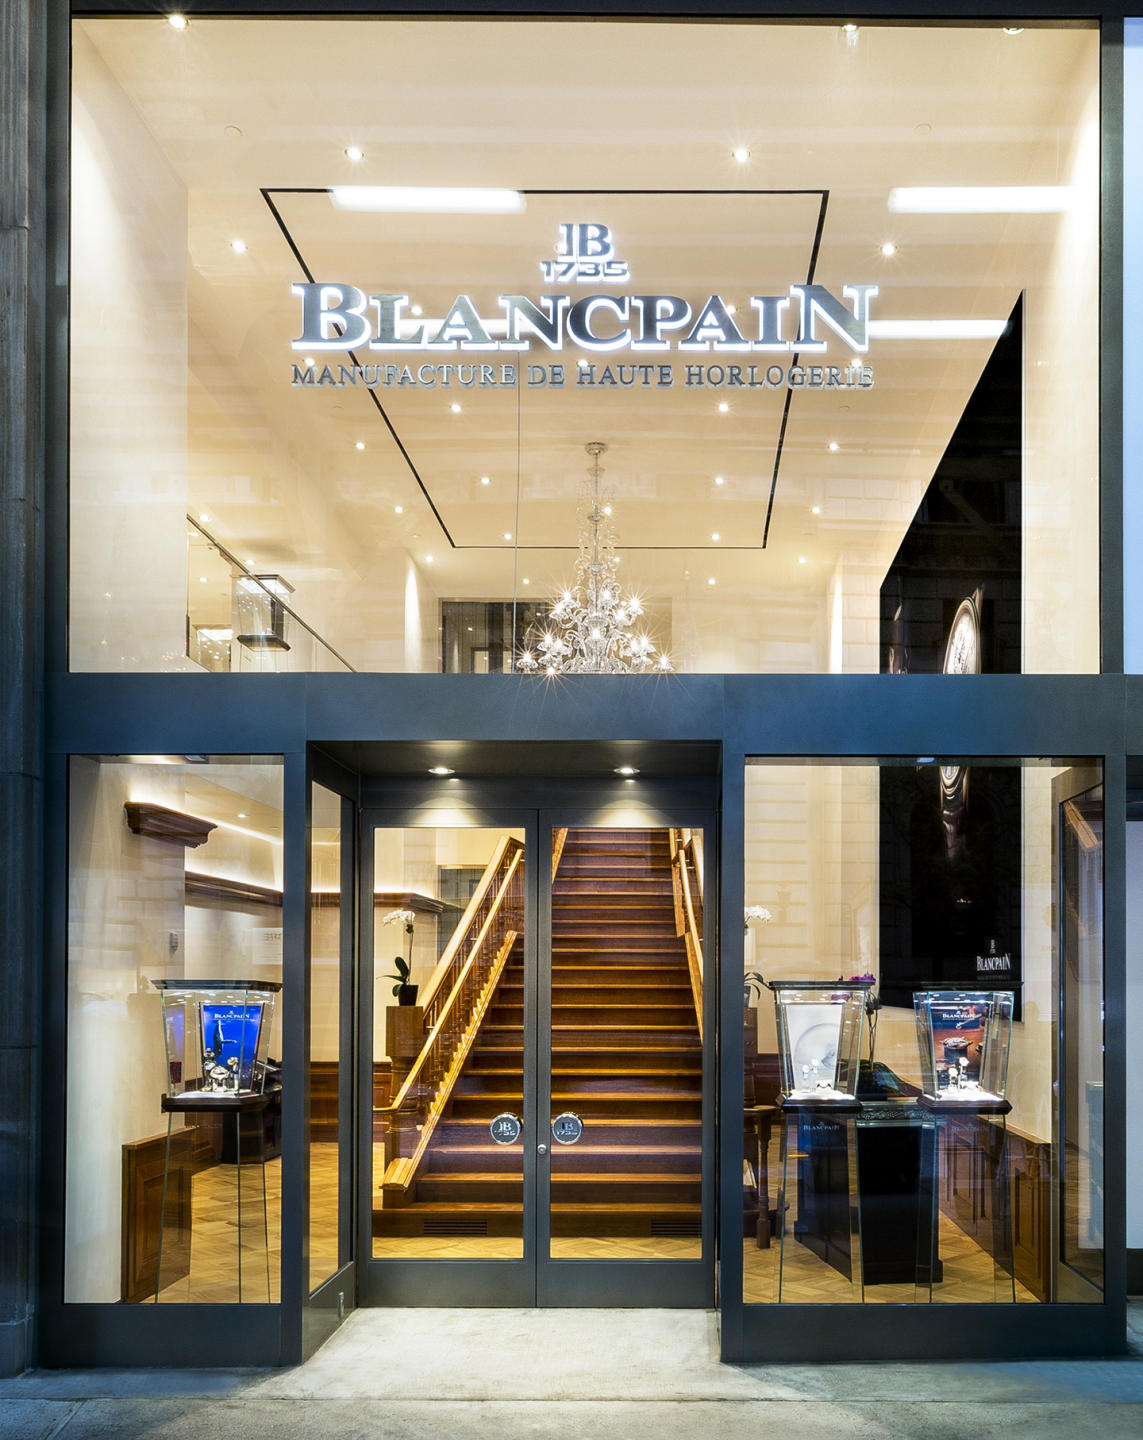 Blancpain Watches retail store on 5th Avenue NYC for the Swatchgroup, Inc. : Blancpain Watches NYC : New York NY Architectural Photographer | Interior and Exterior